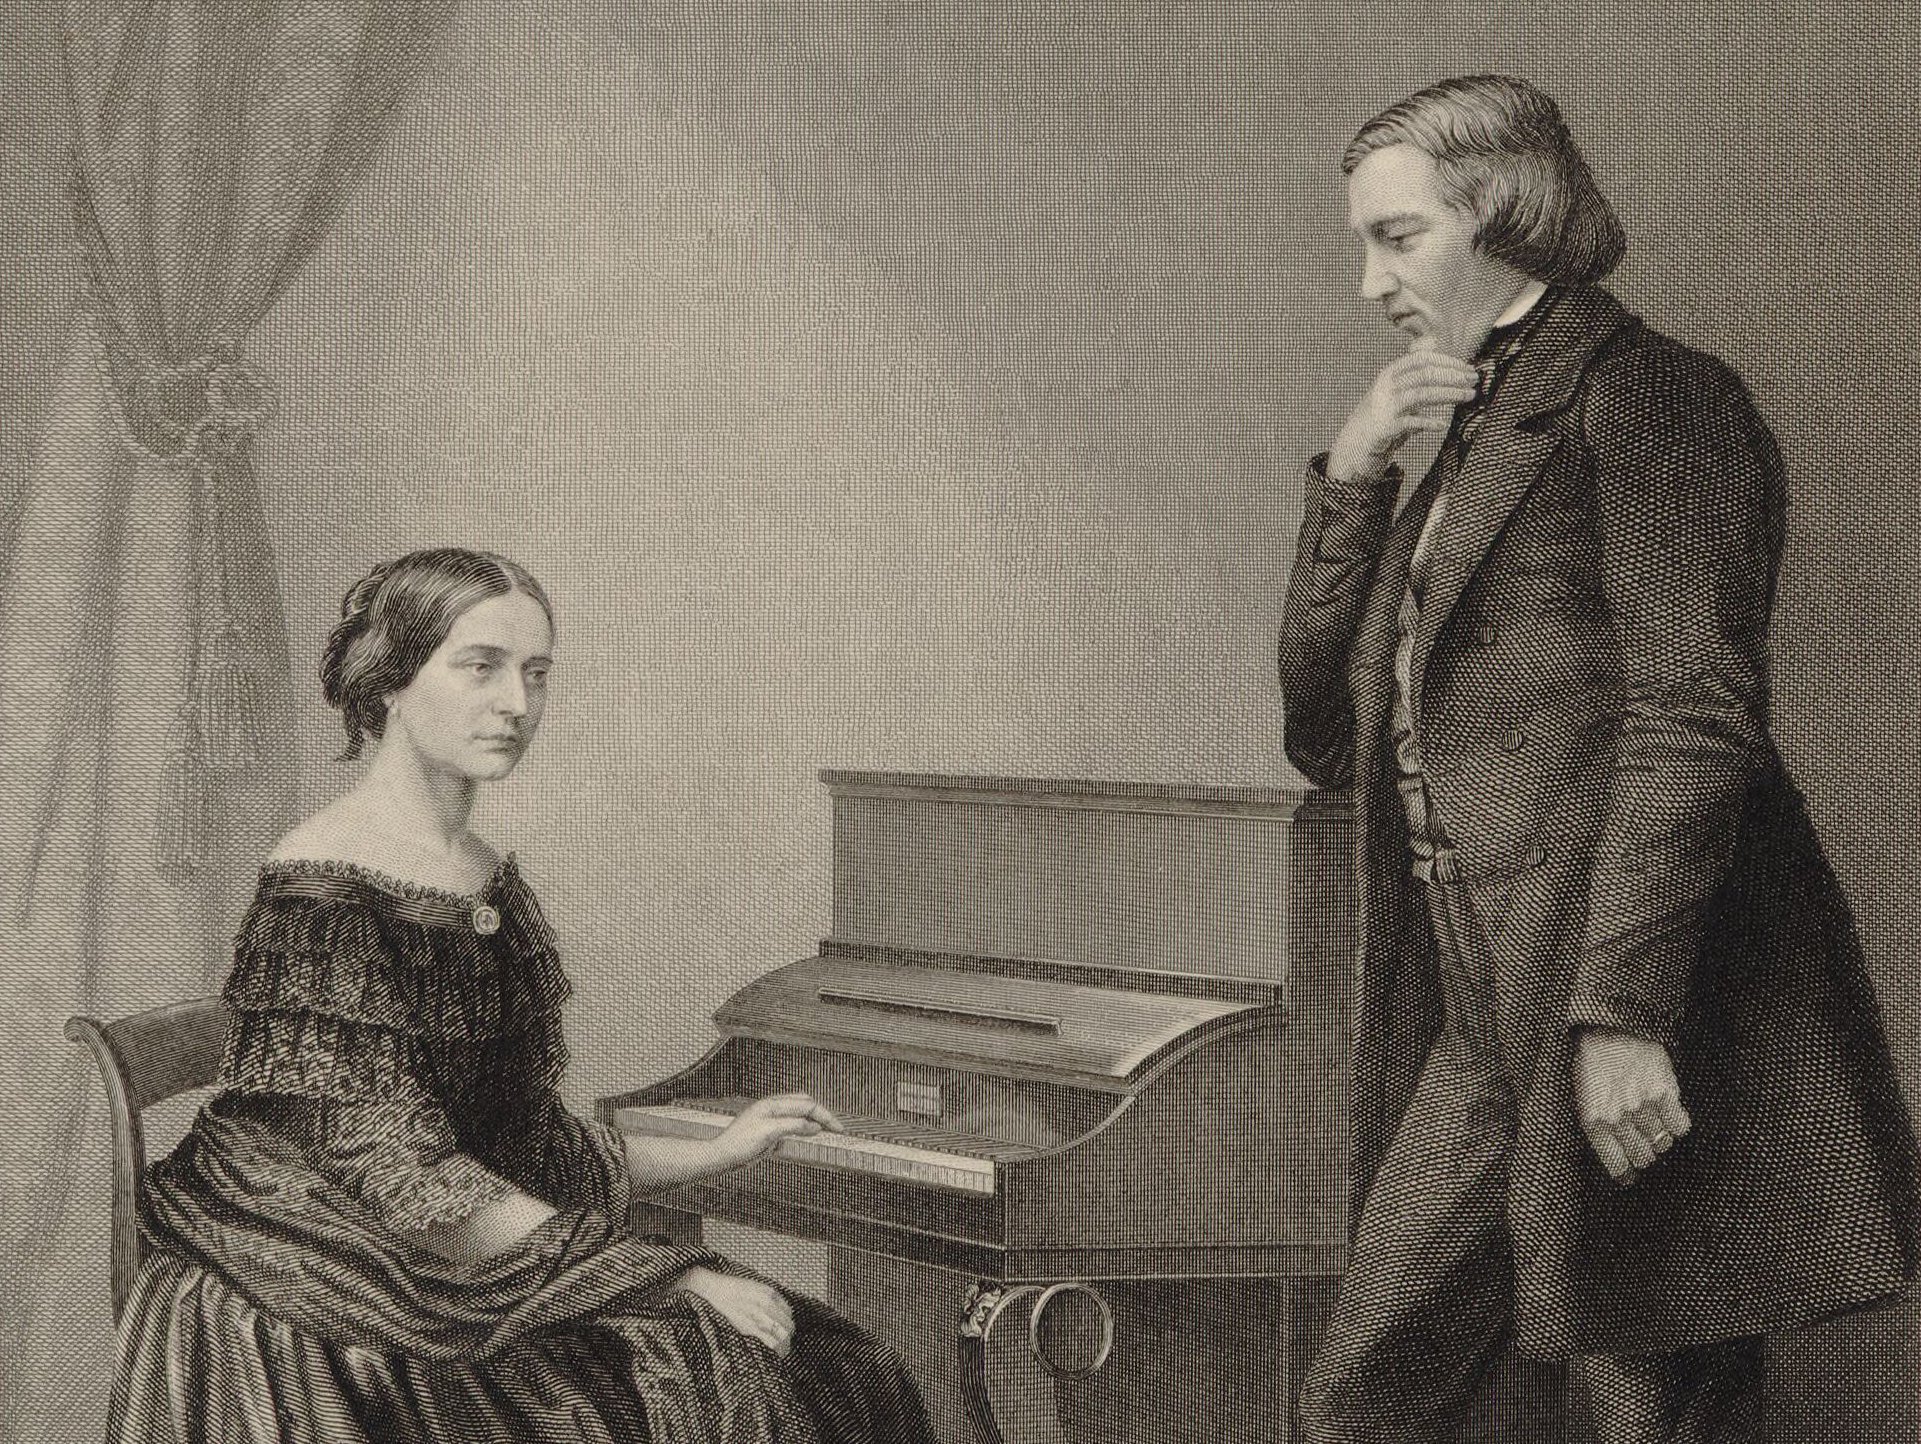 Clara Schumann sitting on the piano (left), Robert Schumann is standing next to her and looking towards her (right).